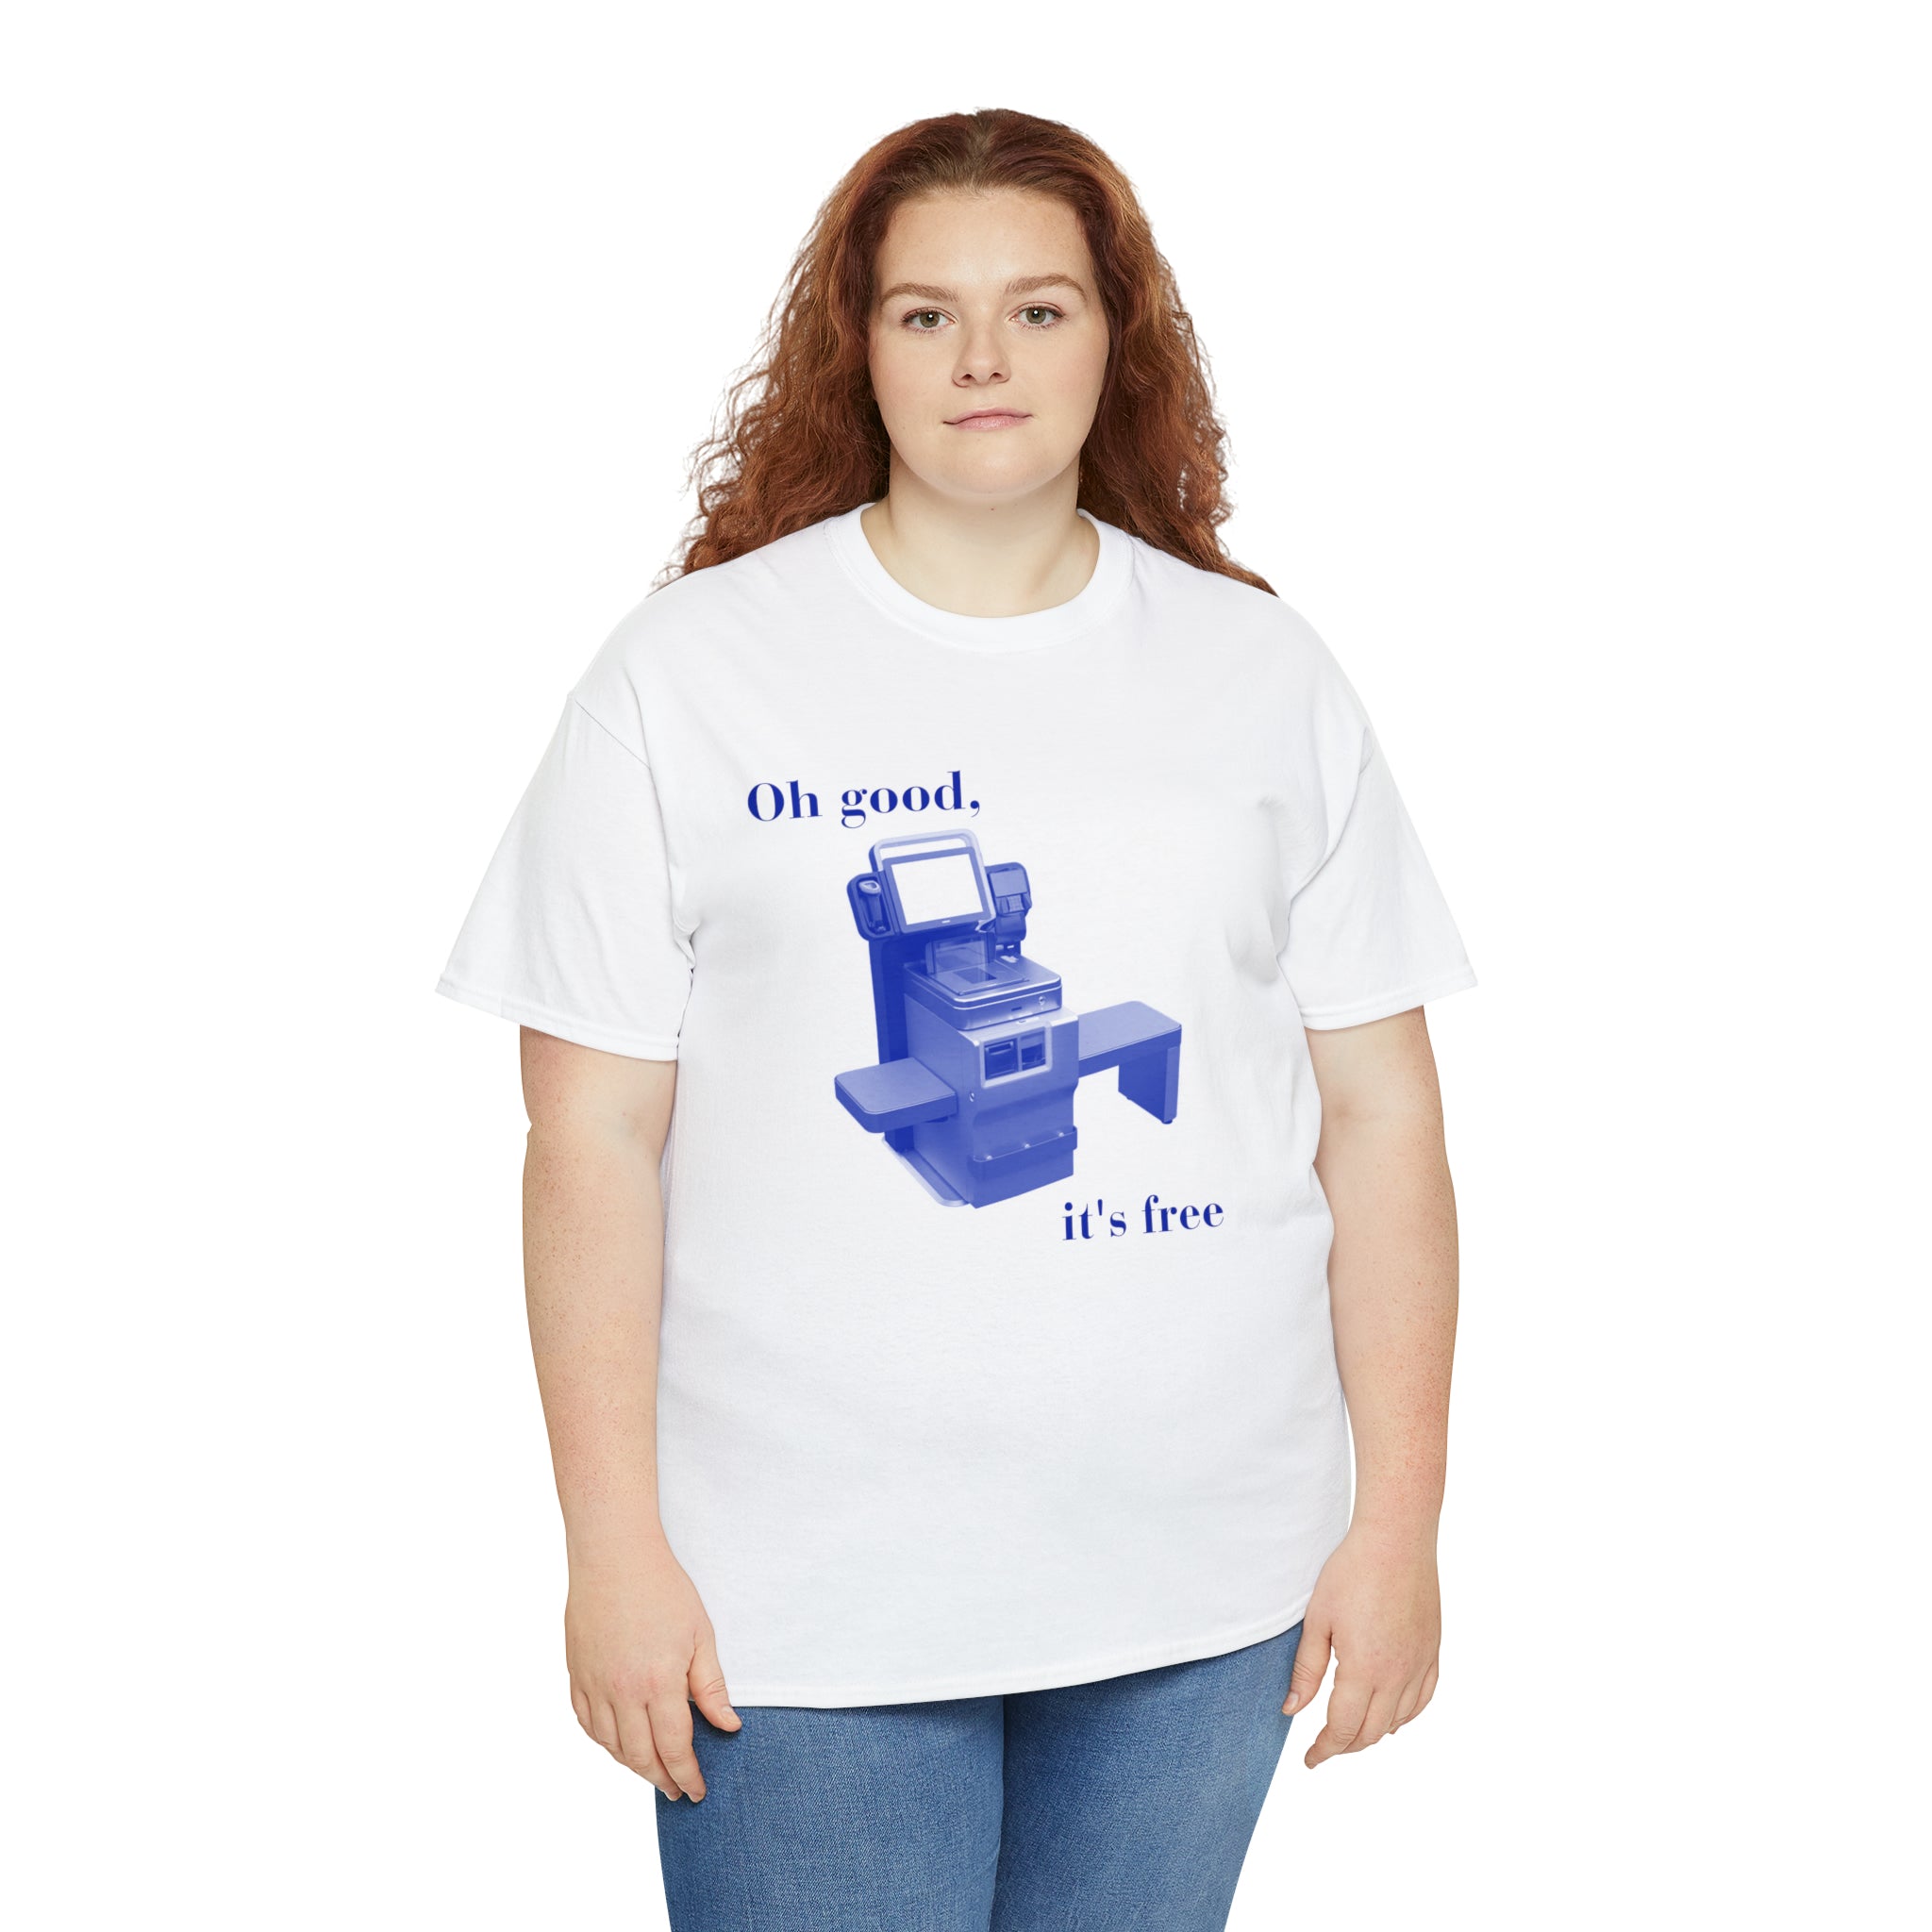 Self Checkout "Oh good, its free" - Unisex Heavy Cotton Tee